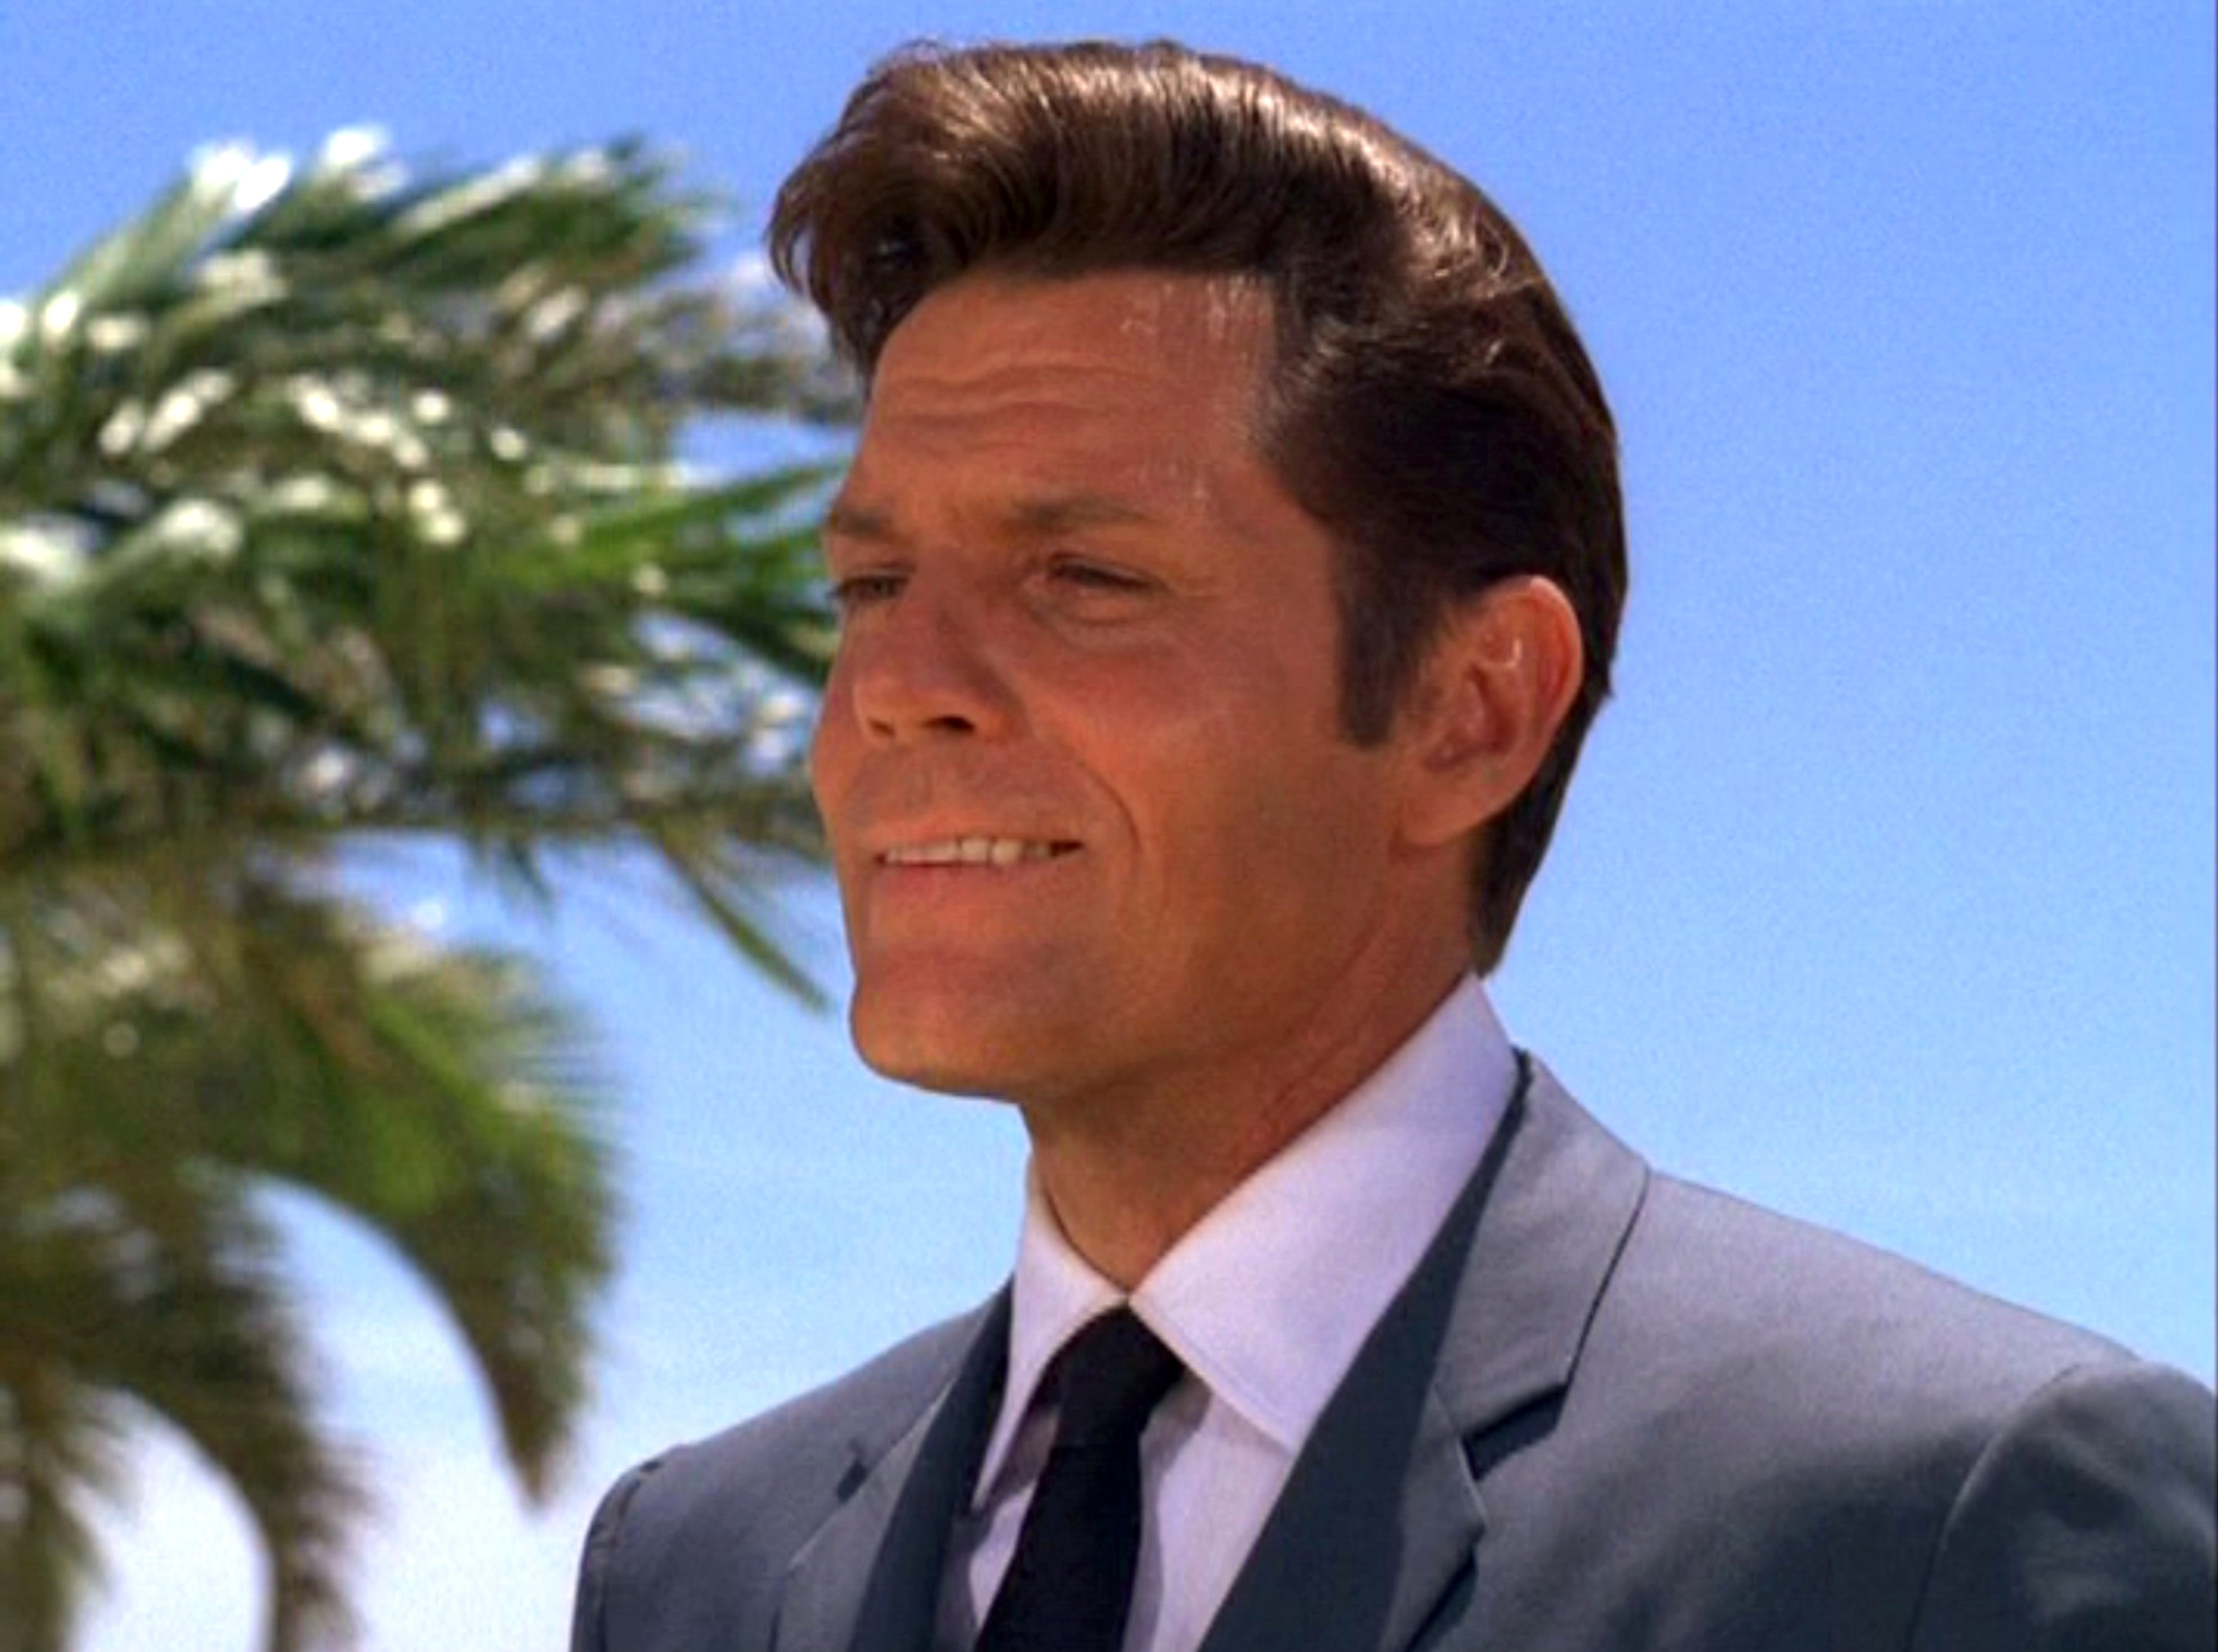 Jack Lord as Steve McGarett in "Hawaii Five-O" circa 1968 | Source: Getty Images